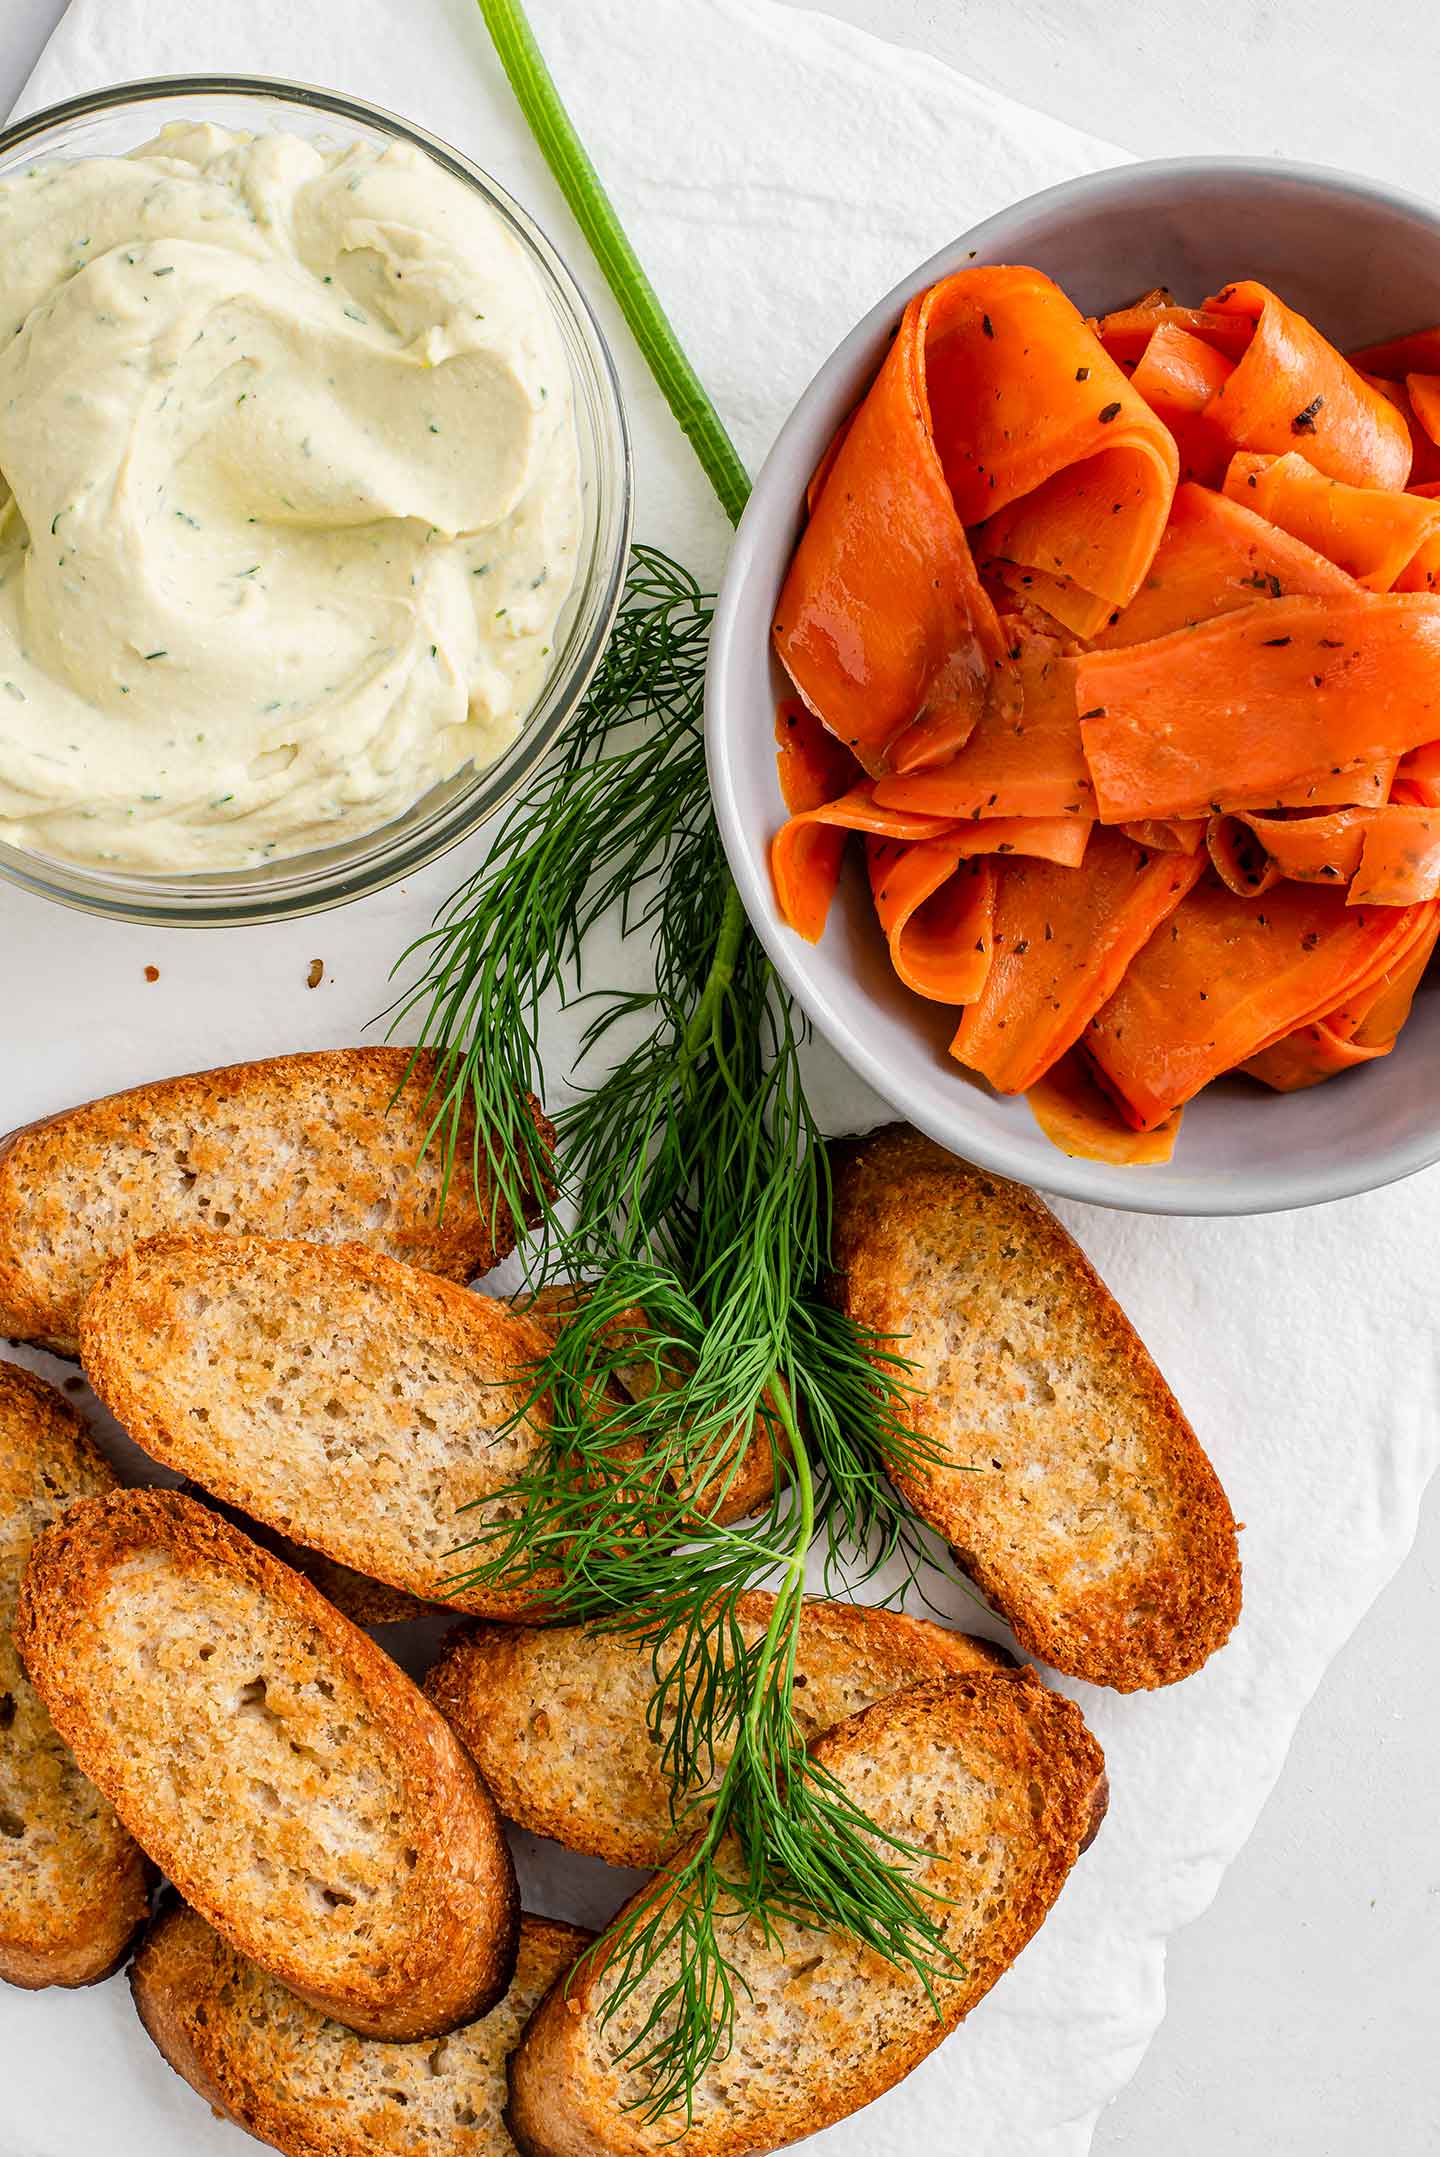 Top down view of toasted crostini, carrot lox, and creamy dill spread for the smoky carrot lox appetizer.